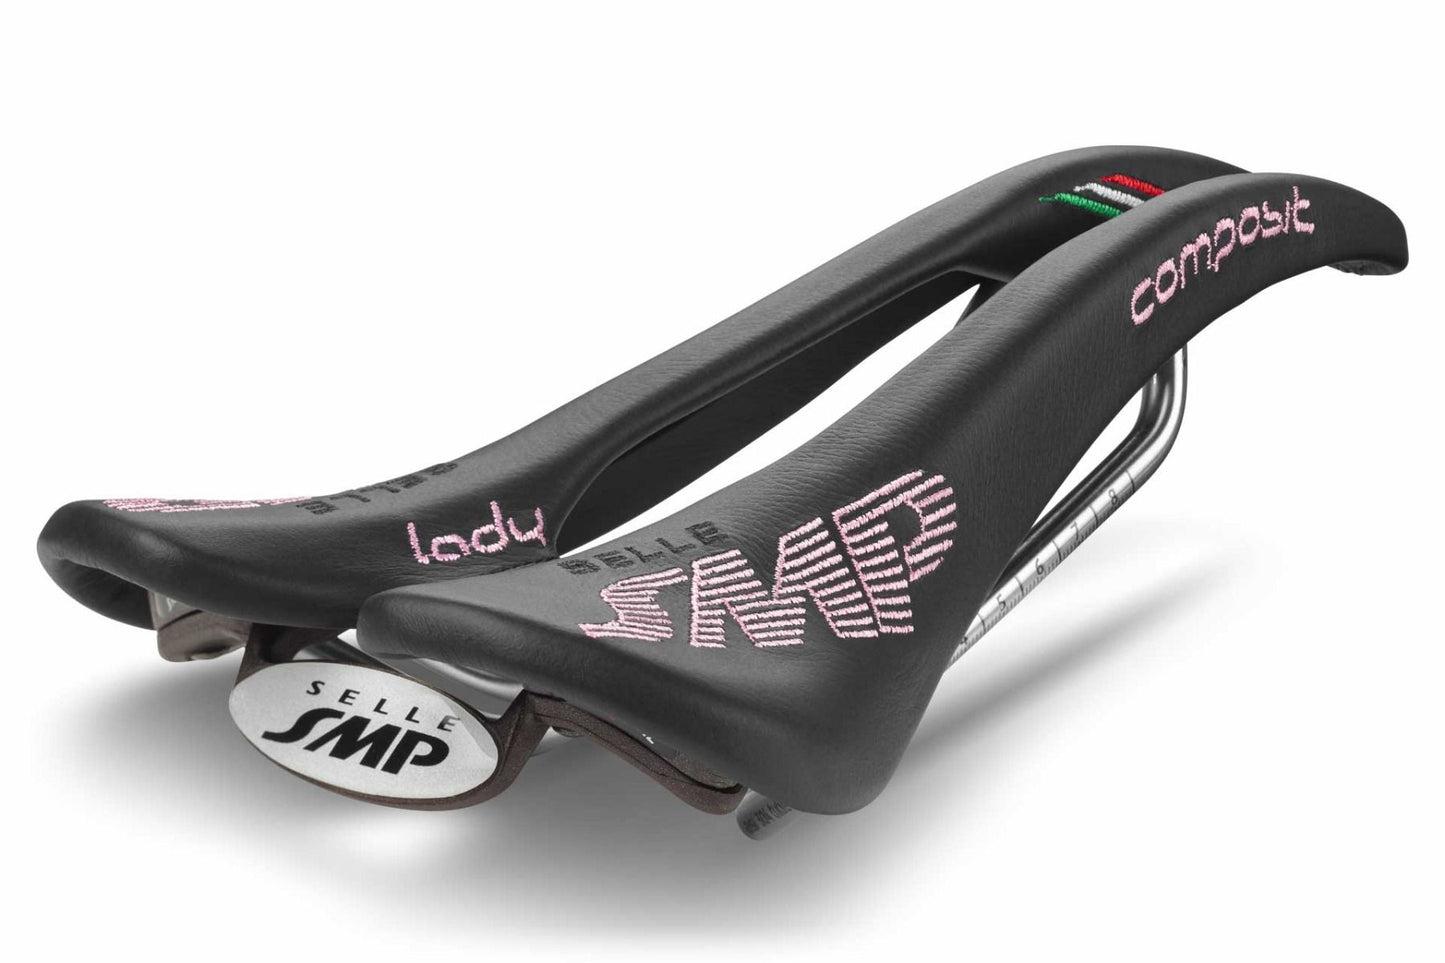 Selle SMP Composit Saddle with Steel Rails (Lady Black)